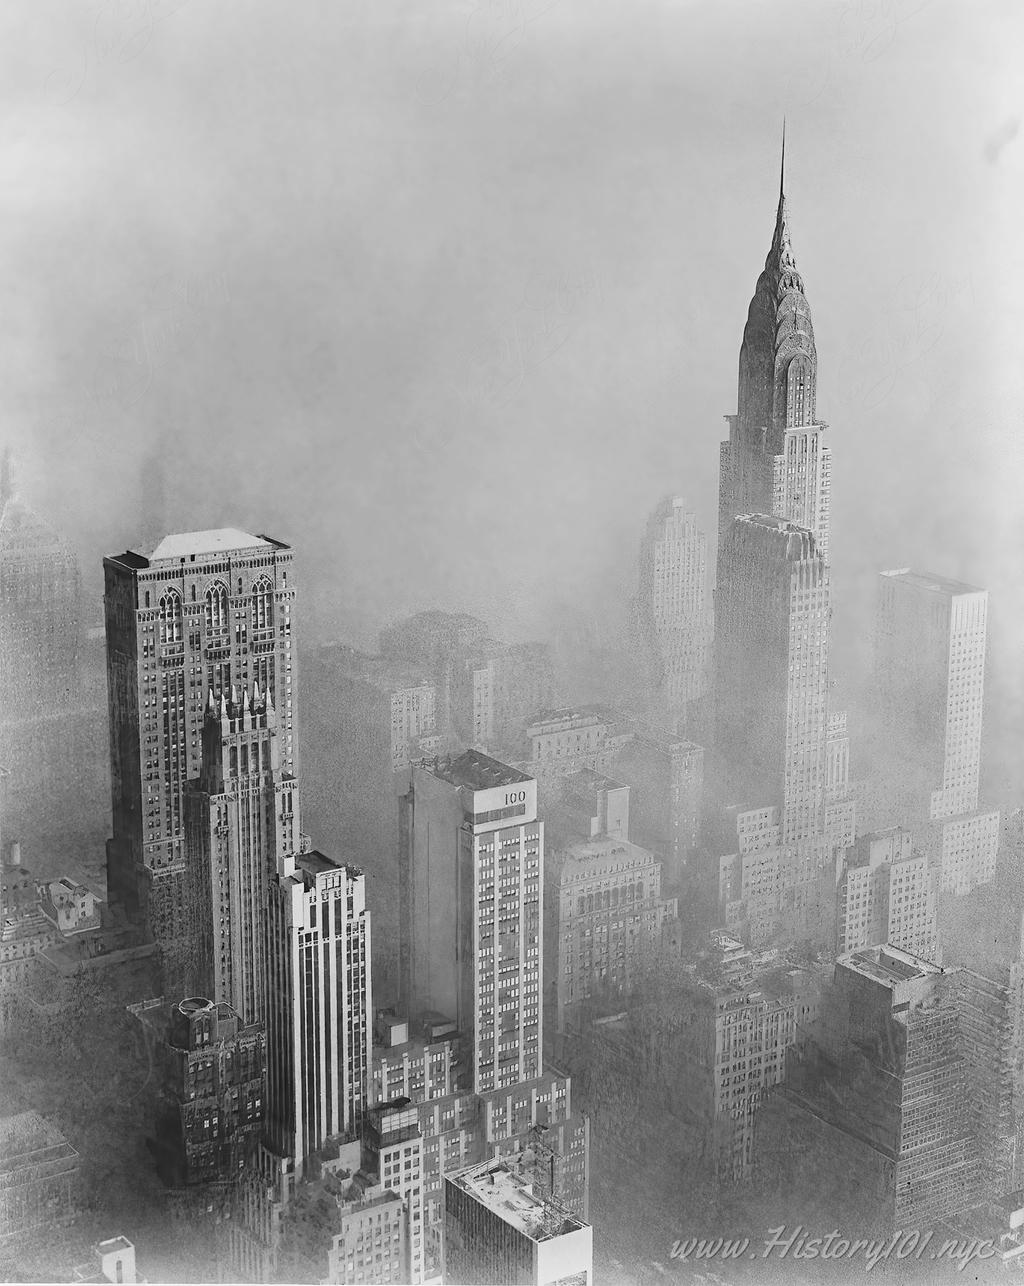 Aerial photograph of smog obscuring a view of the Chrysler Building from the Empire State Building.